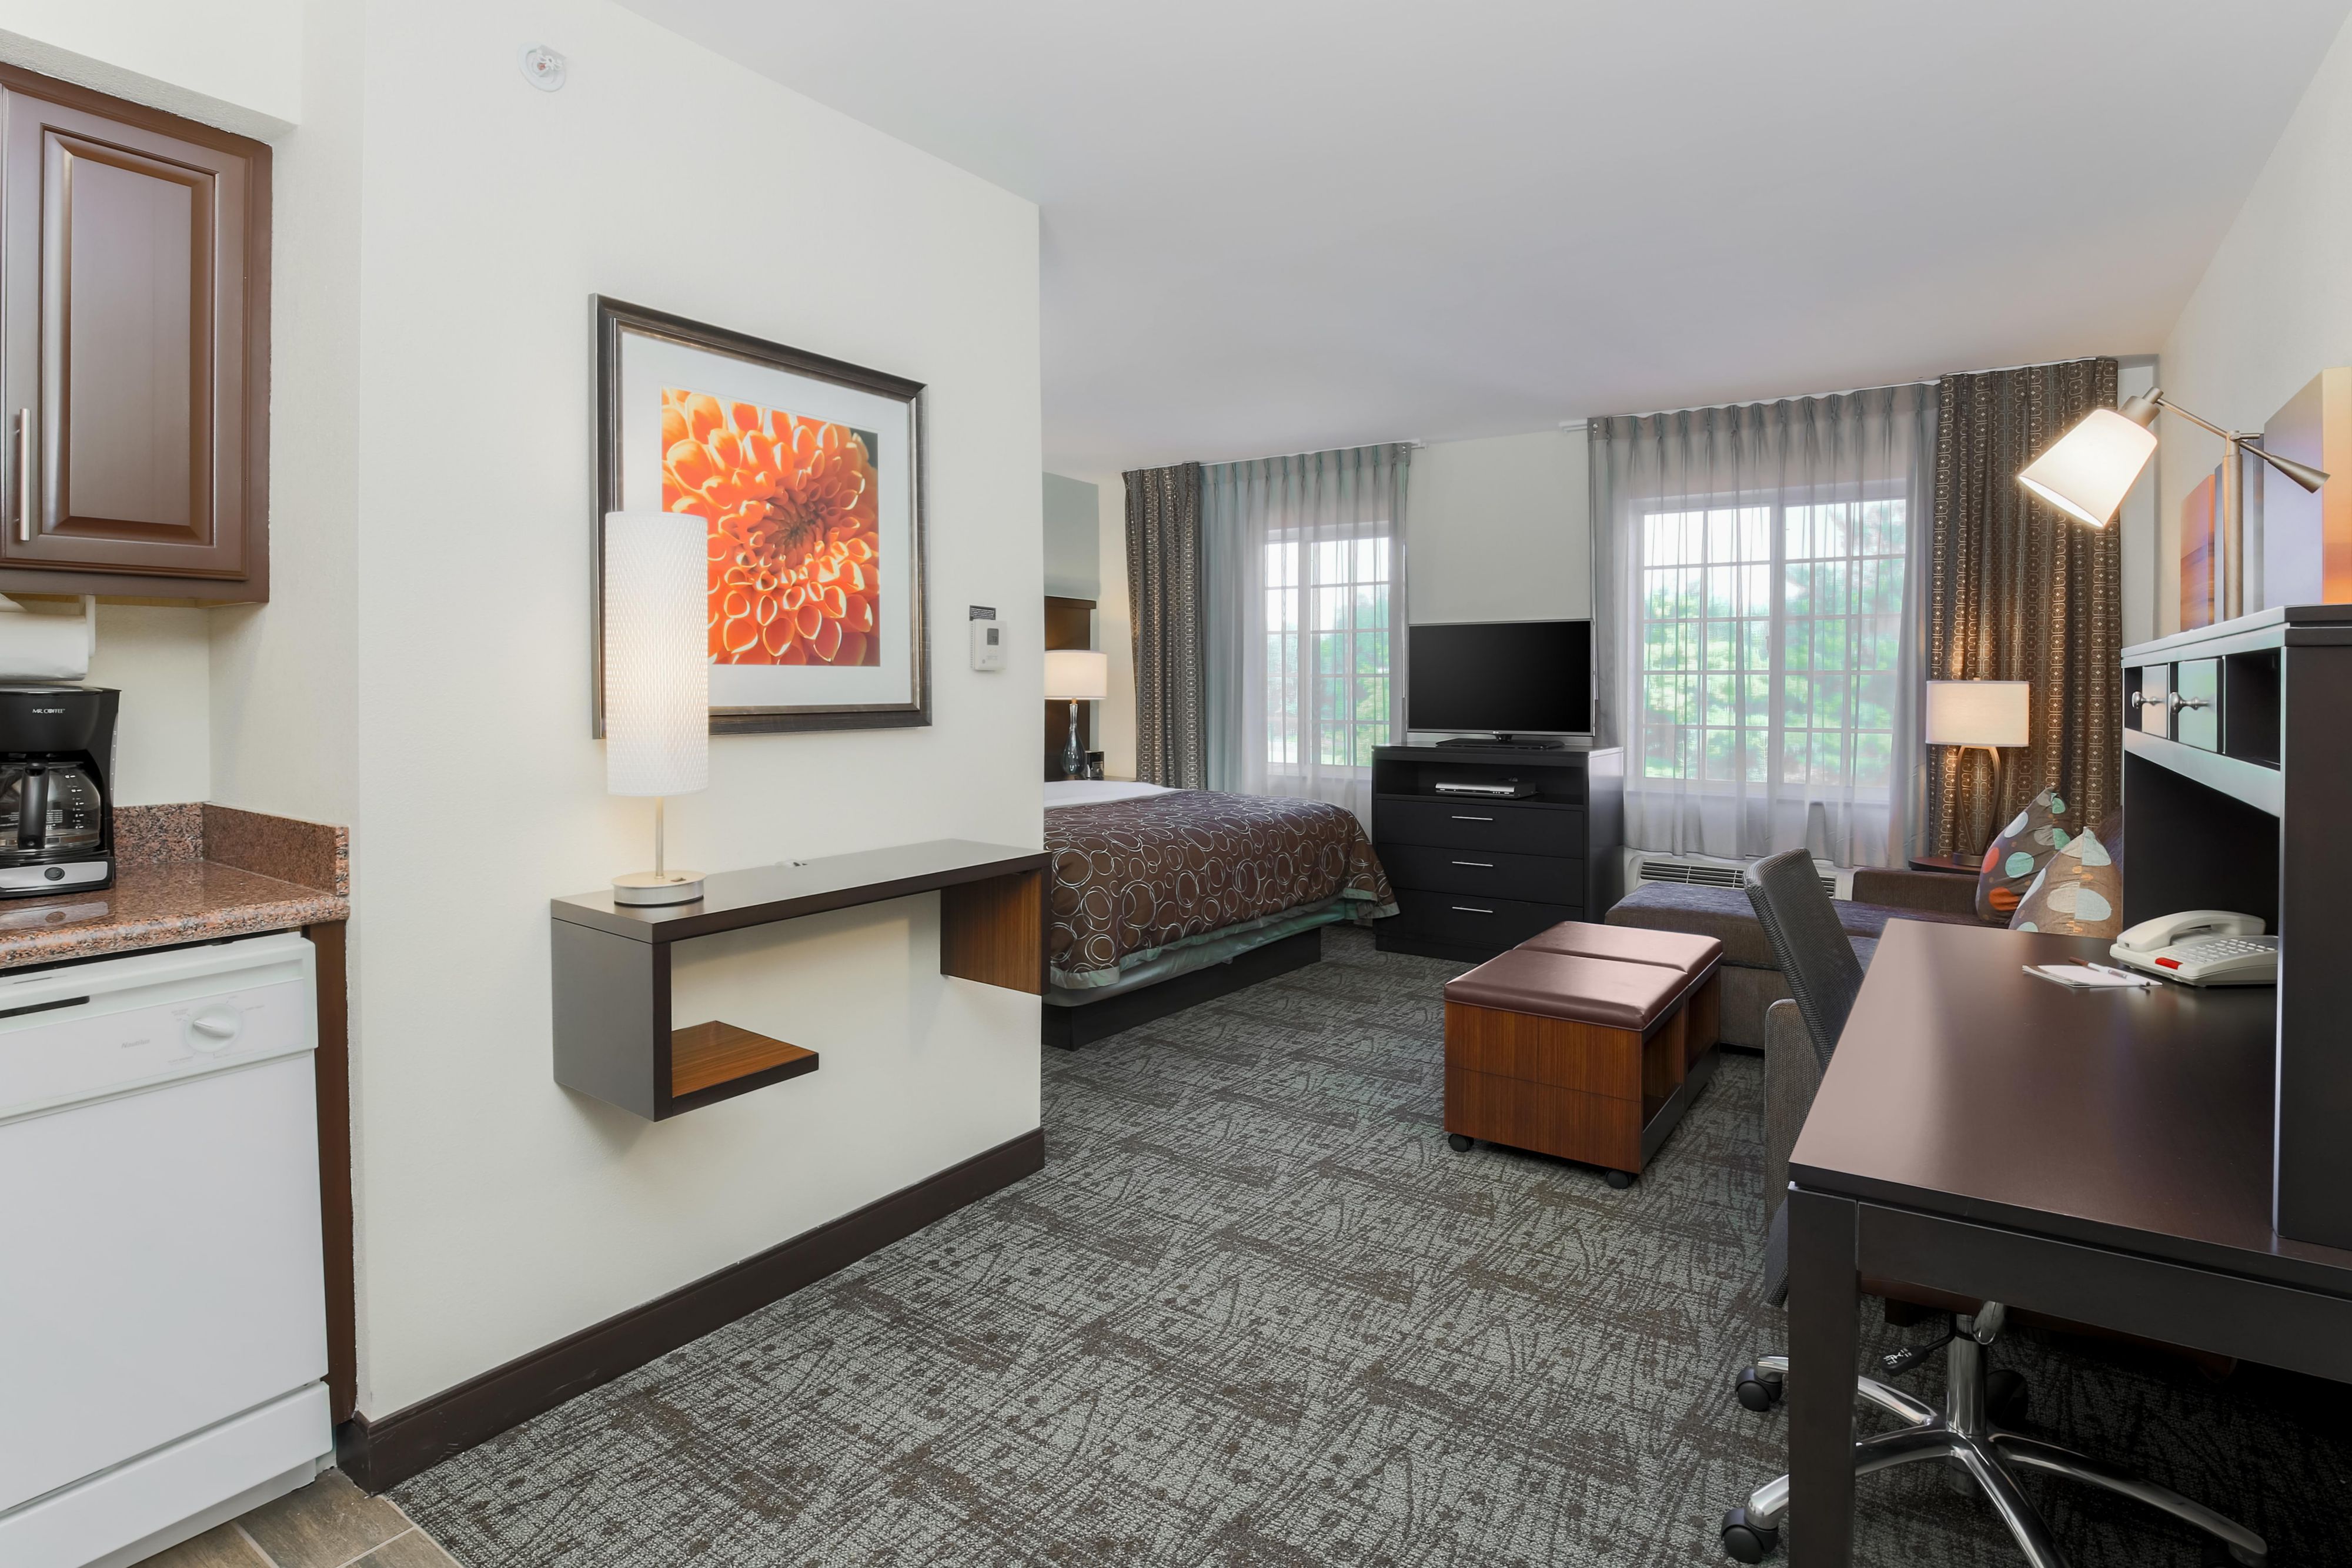 Spread out in one of our studio, one-bedroom or two-bedroom suites with enough space, storage and flexibility to stay productive and at ease.